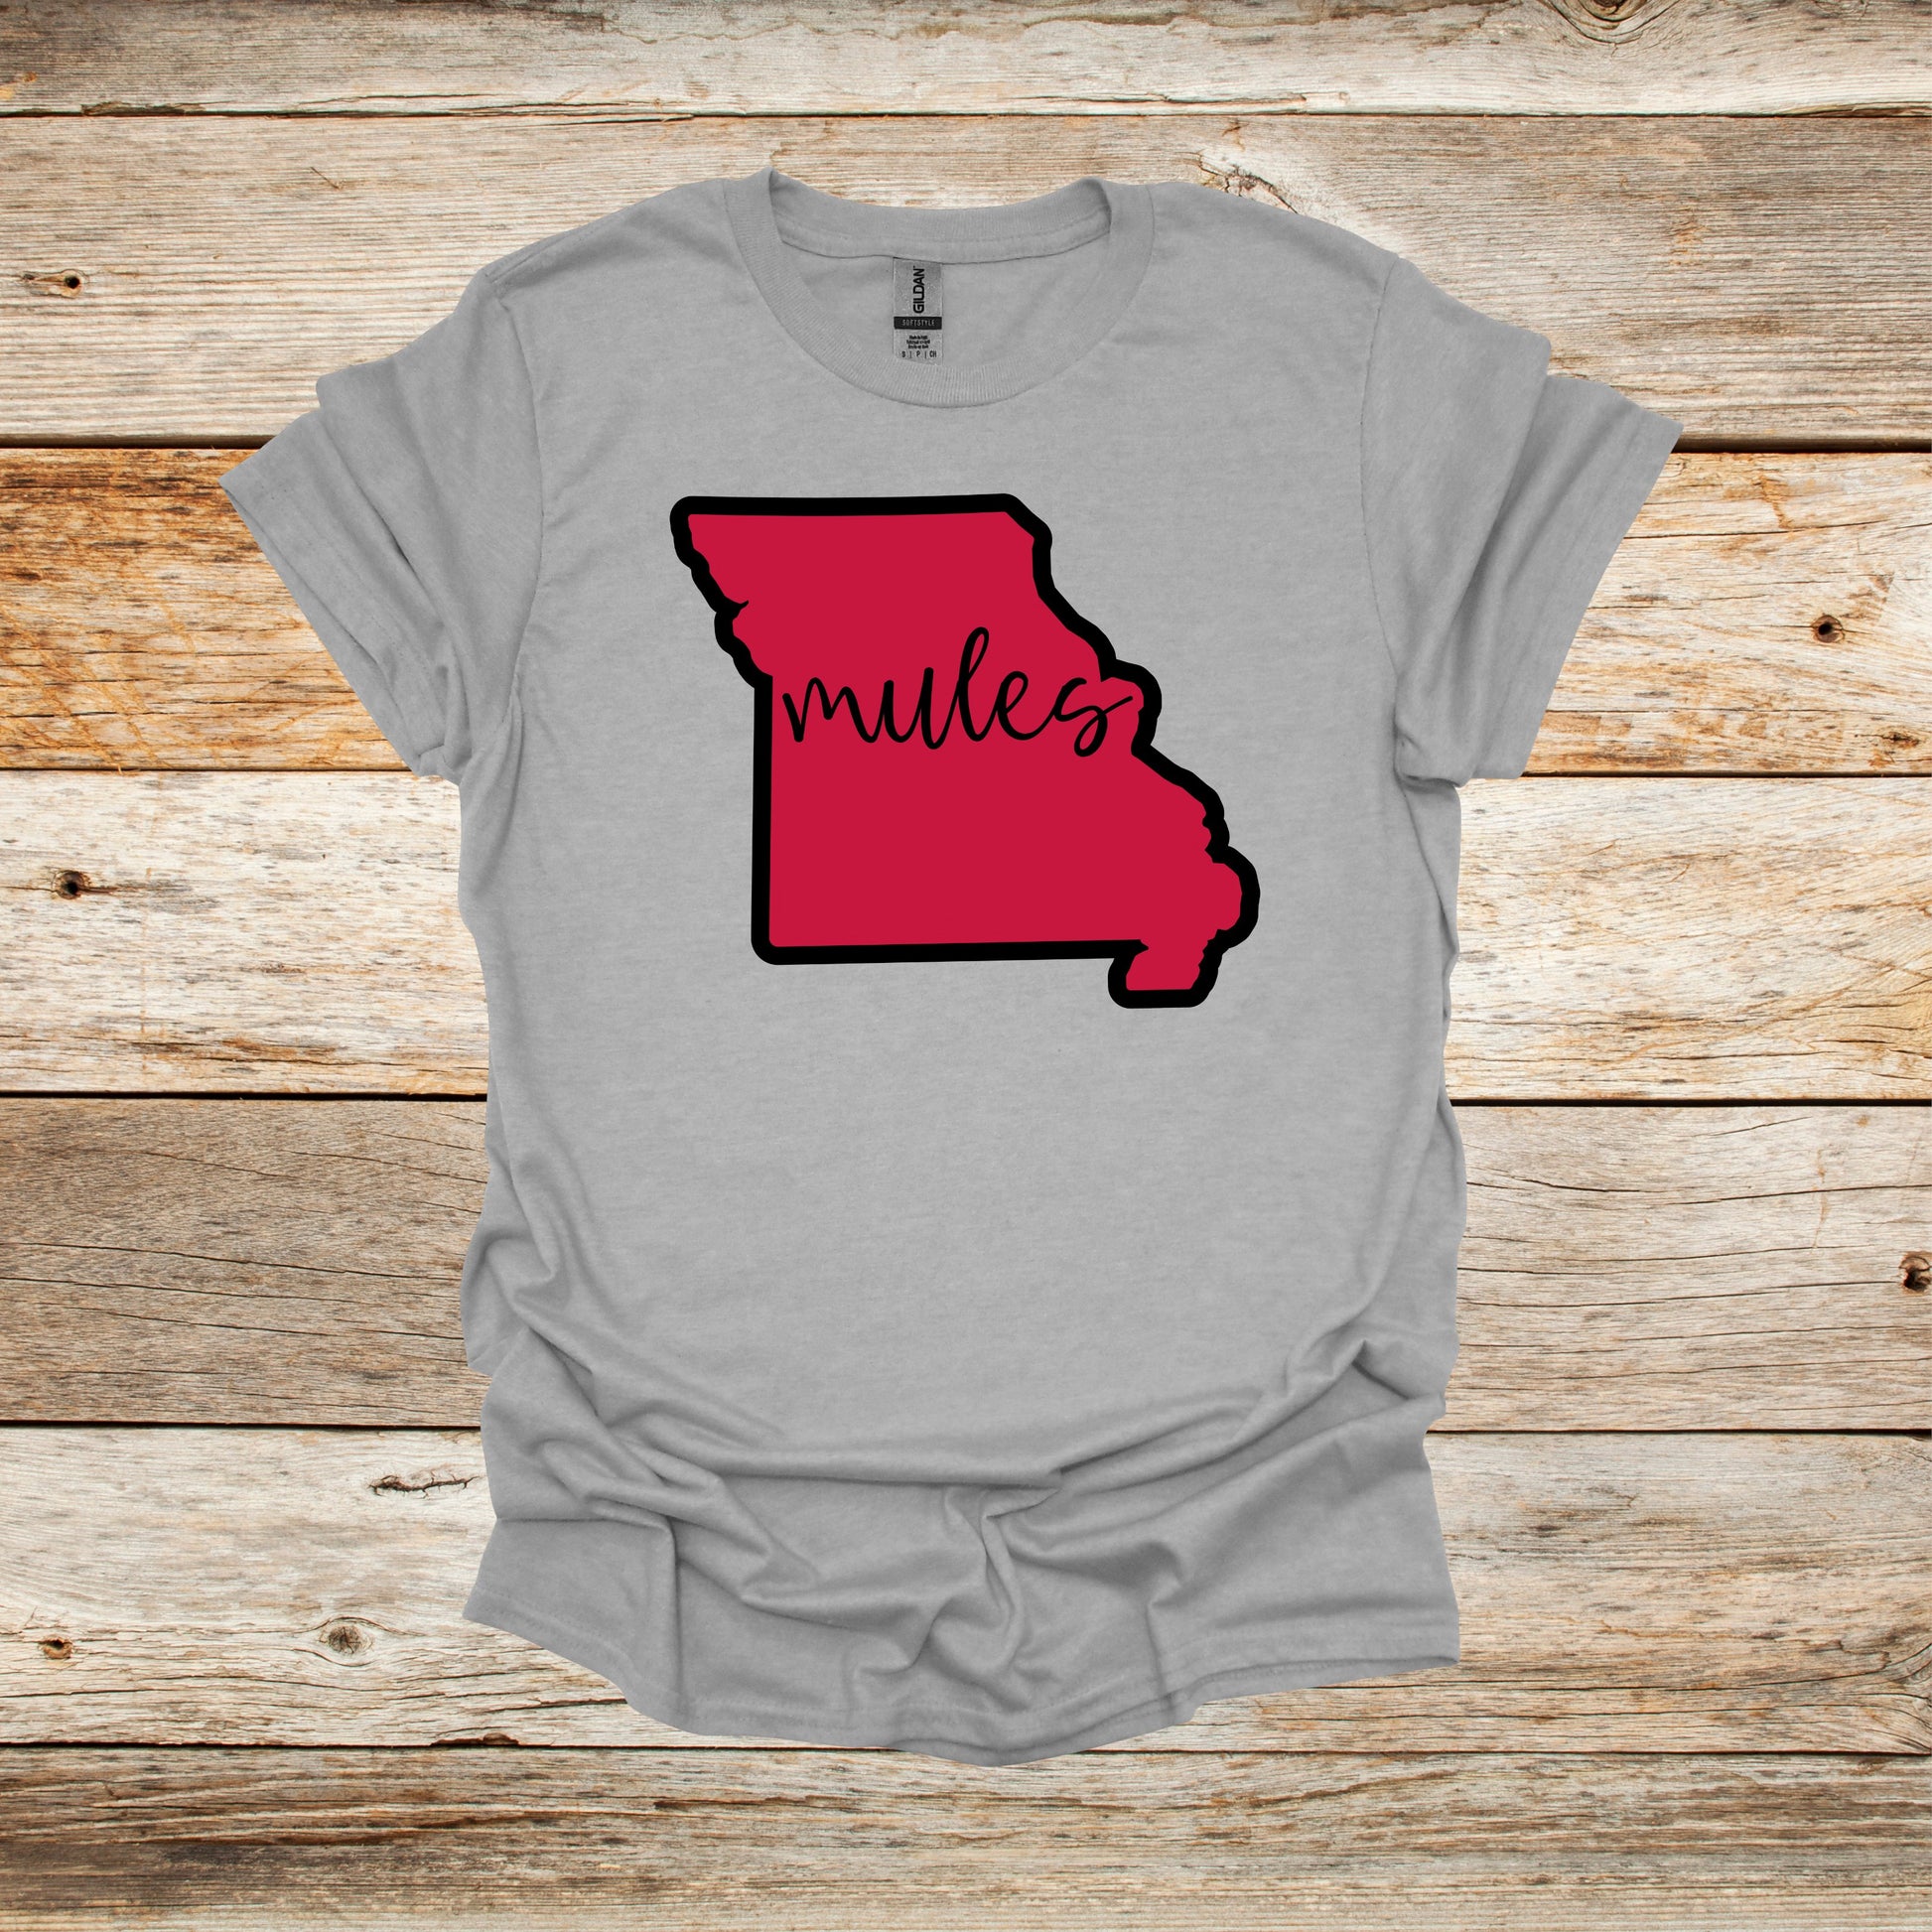 College T Shirt - University of Central Missouri Mules - State Outline - Adult and Children's Tee Shirts T-Shirts Graphic Avenue Sport Grey Adult Small 